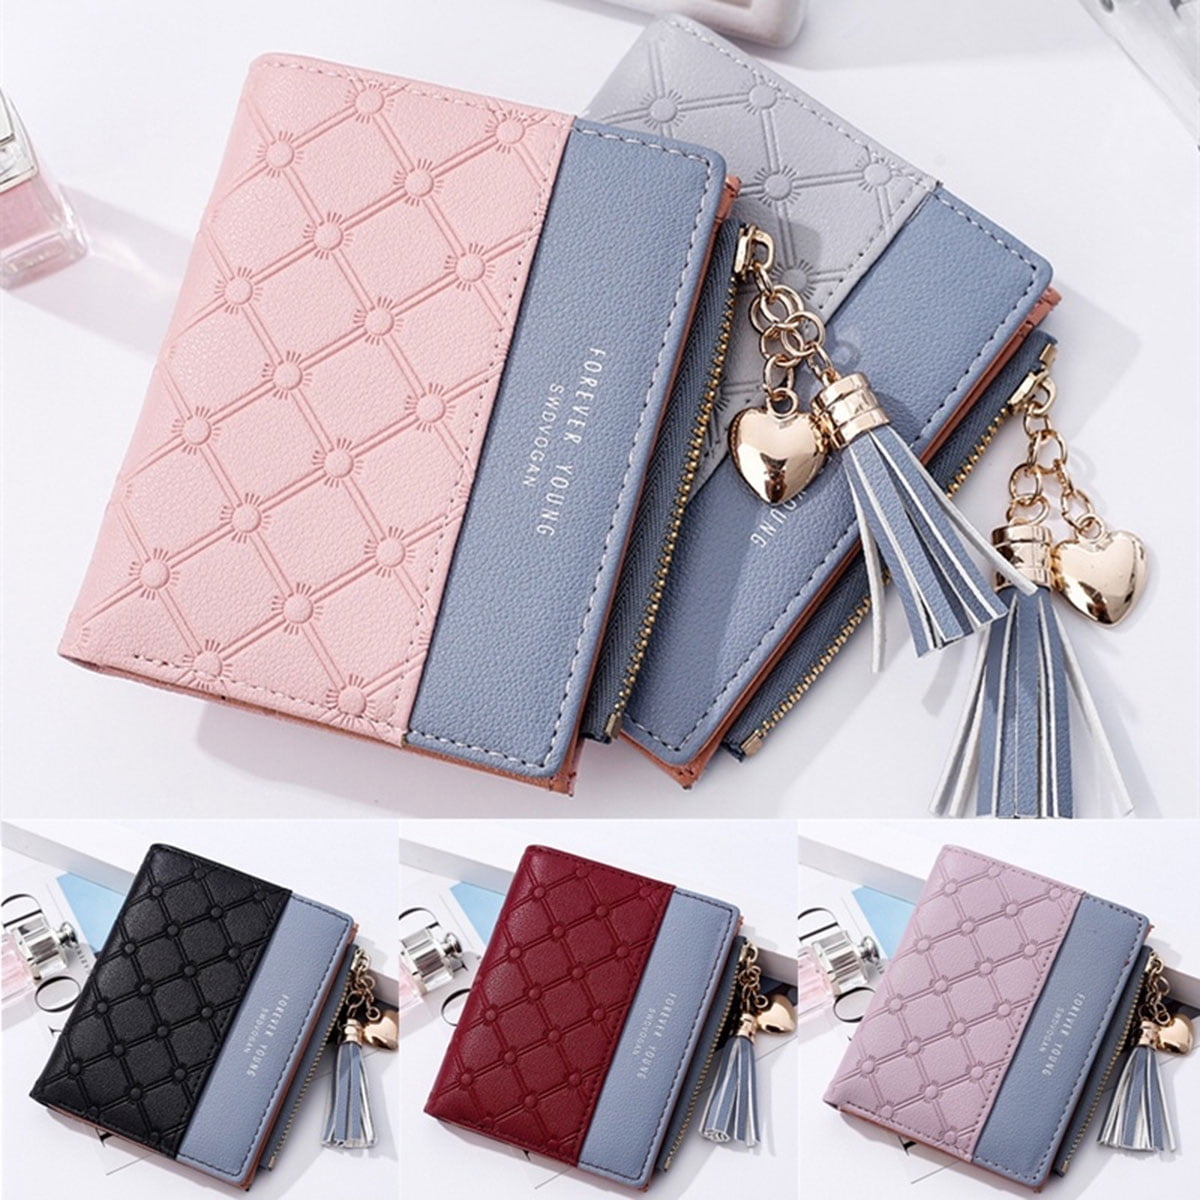  Fashion Style Trifold Small Wallet PU Leather Women Wallet Purse  Card Wallet Clutches (Black, One Size) : Clothing, Shoes & Jewelry